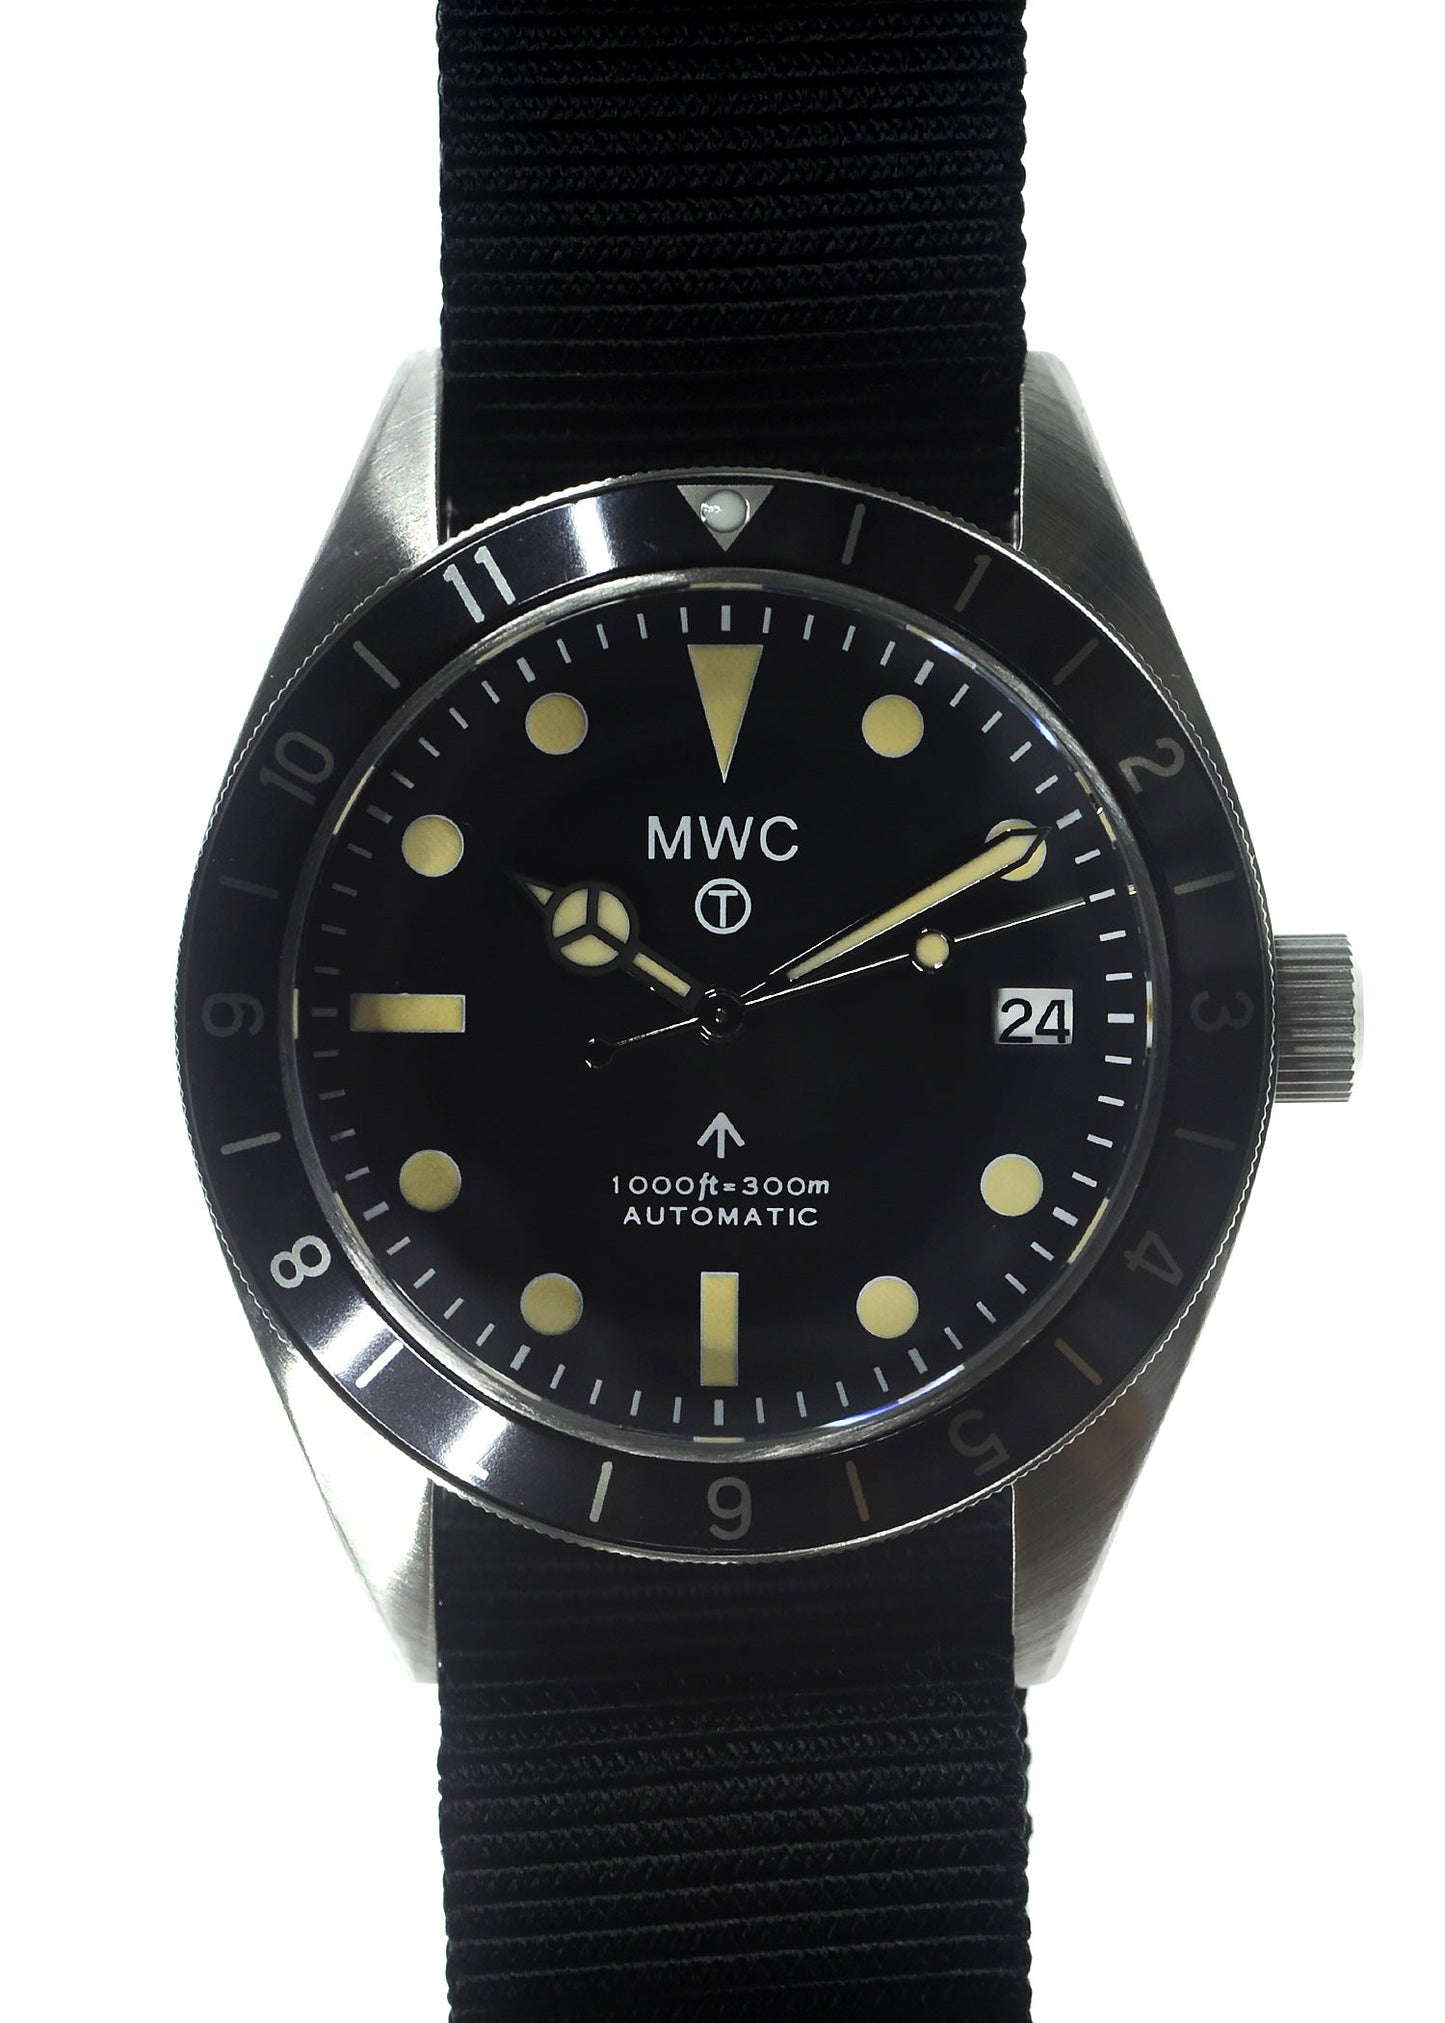 MWC Classic 1960s Pattern Dual Time Zone Automatic Divers Watch with Retro Luminous Paint and Sapphire Crystal